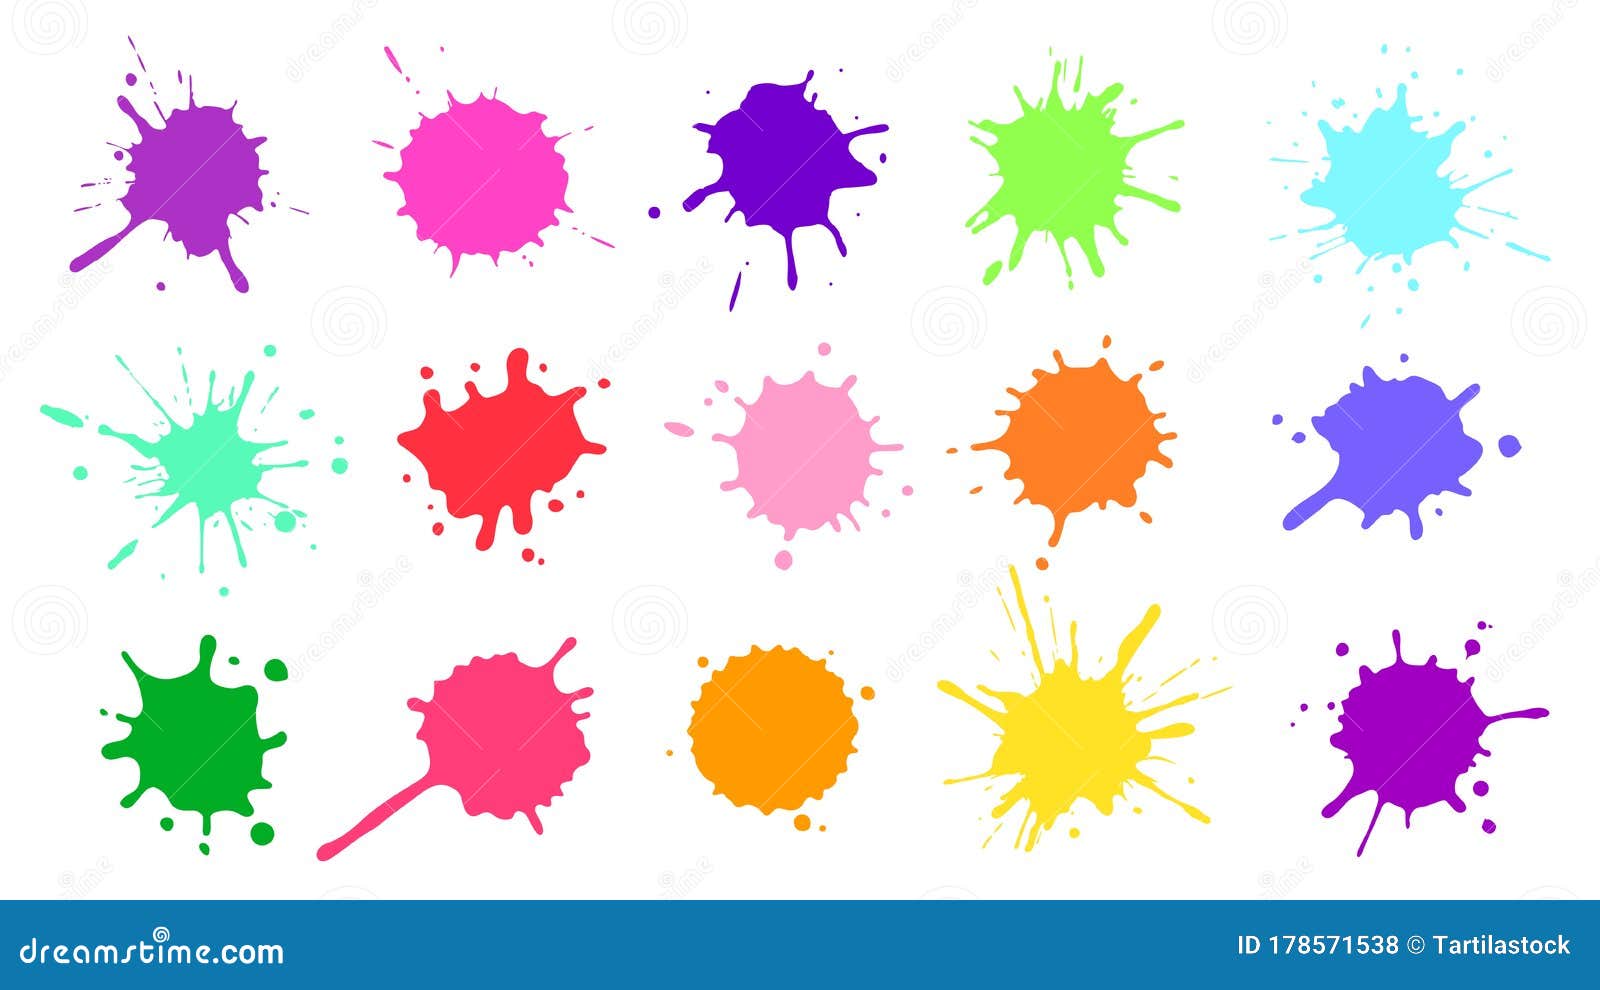 color paint splatter. colorful ink stains, abstract paints splashes and wet splats. watercolor or slime stain  set